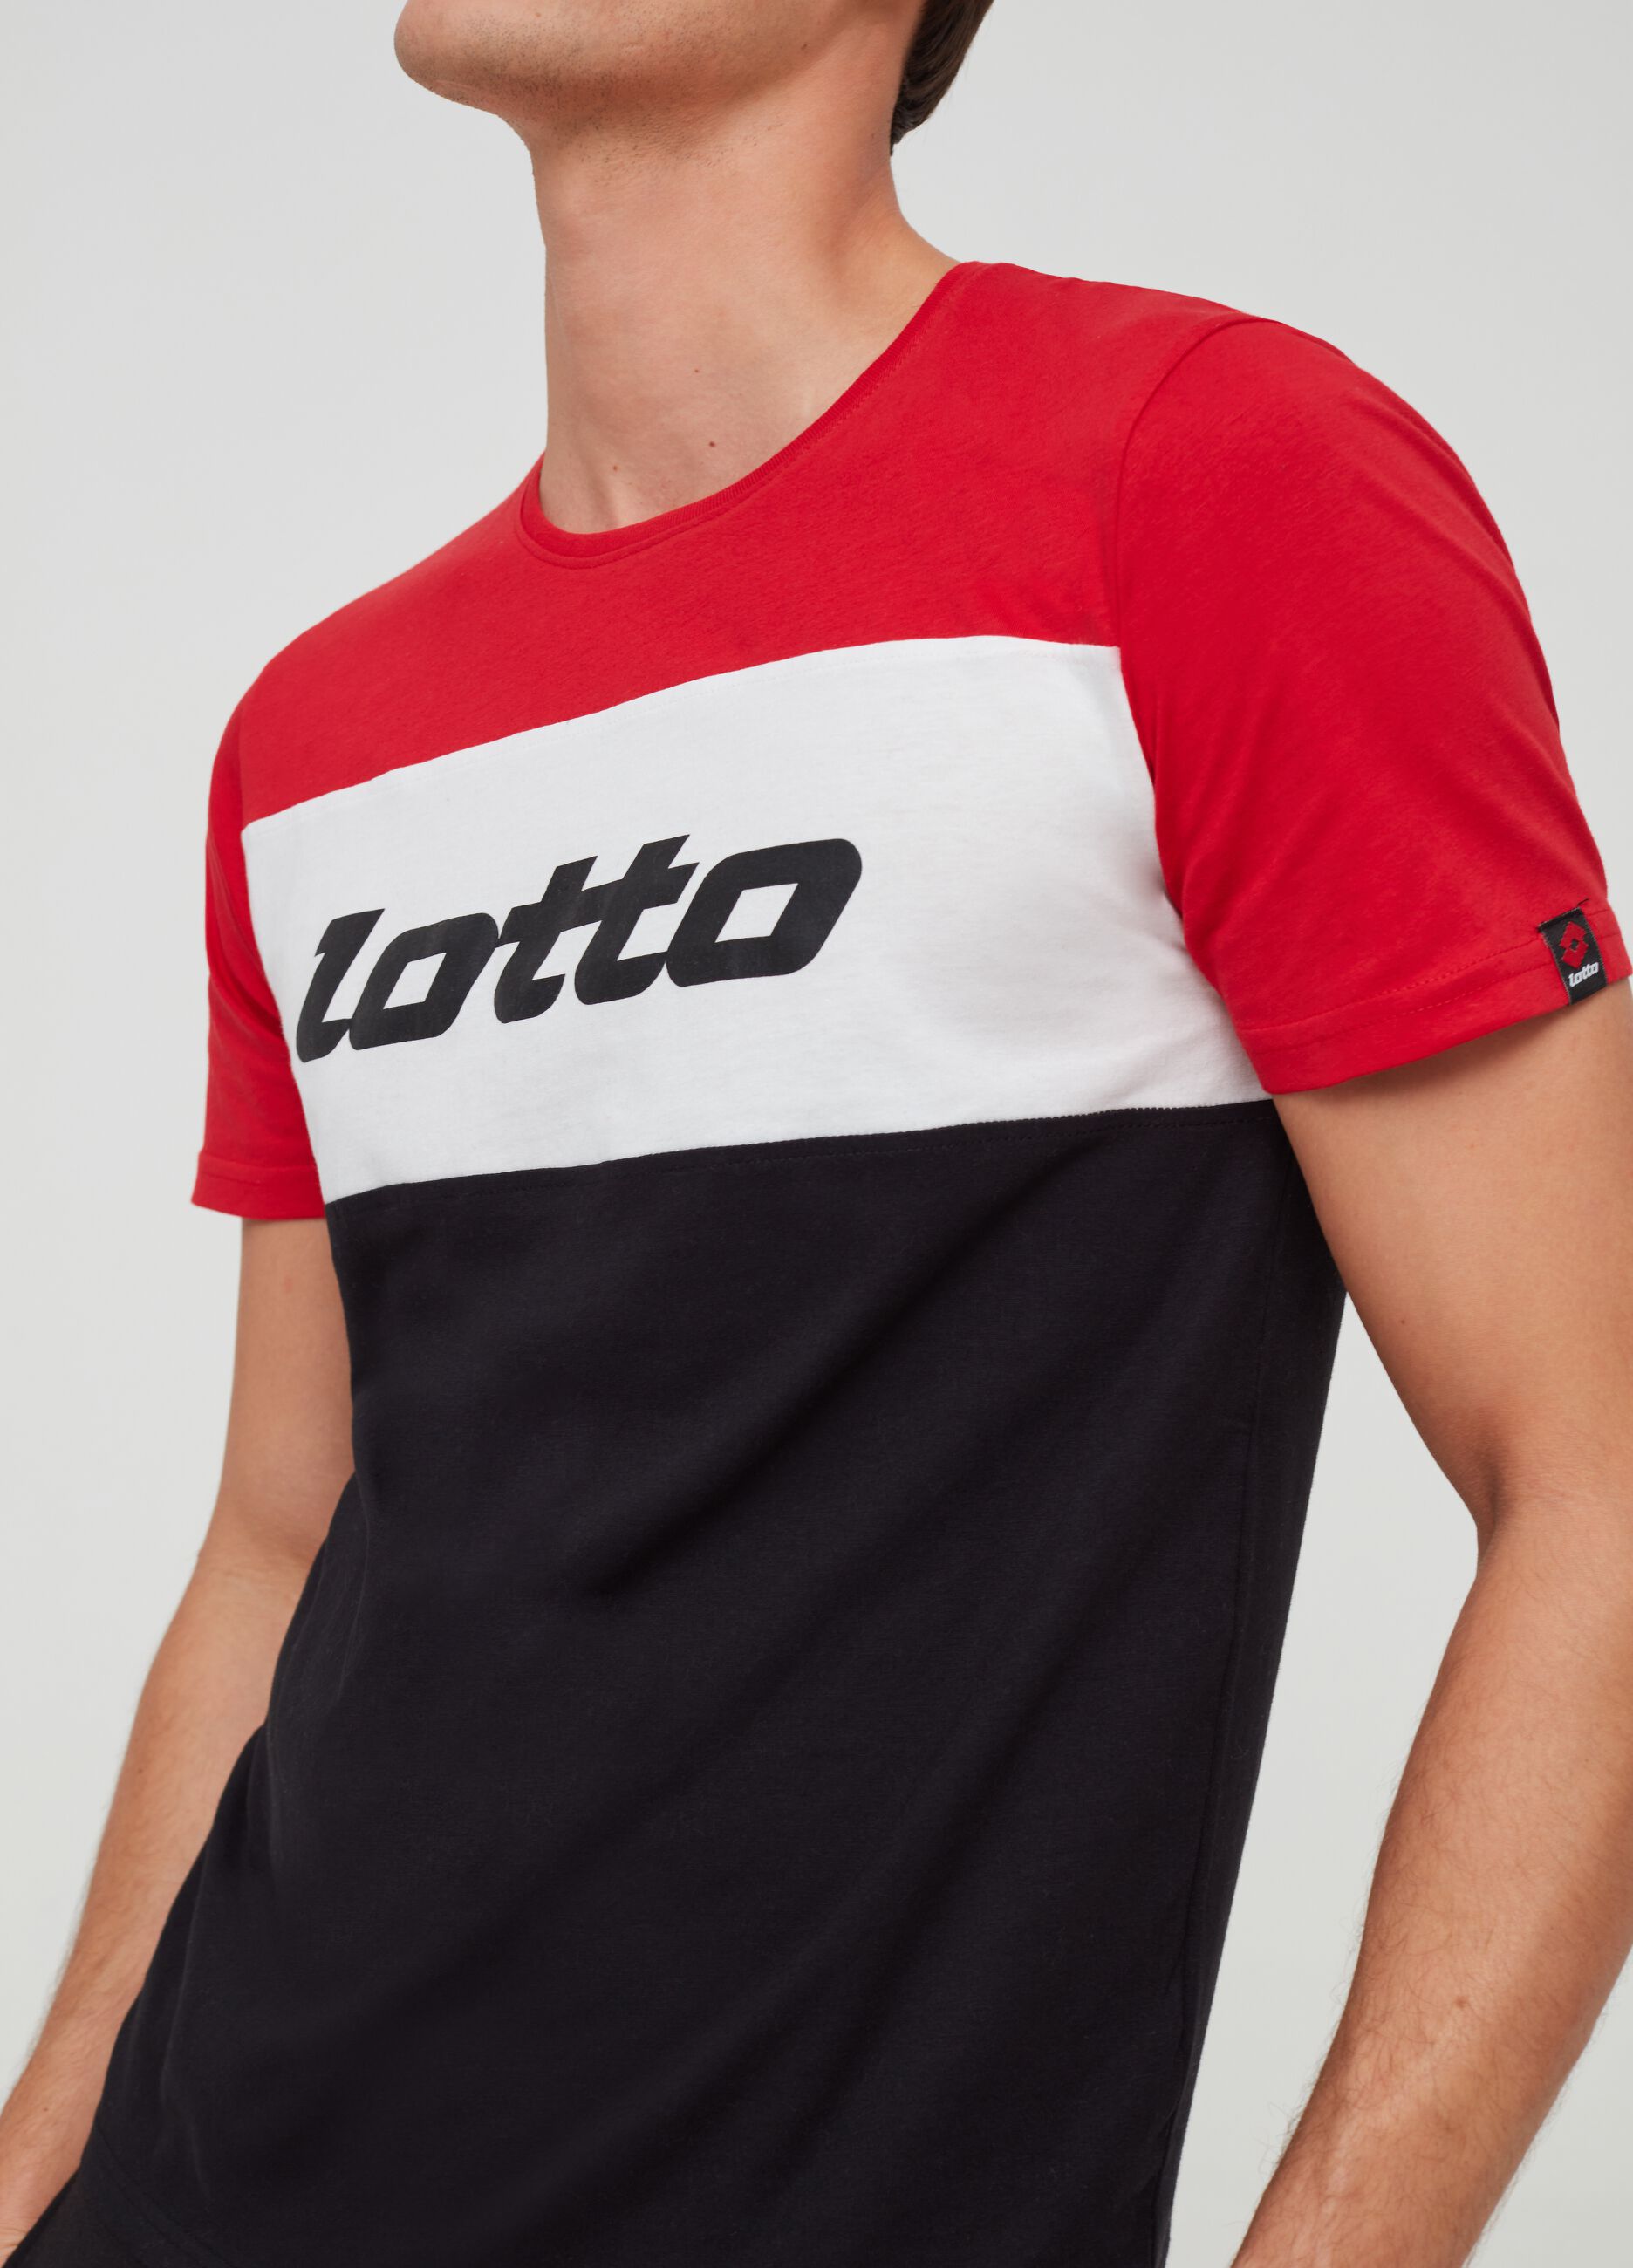 100% cotton T-shirt with Lotto print